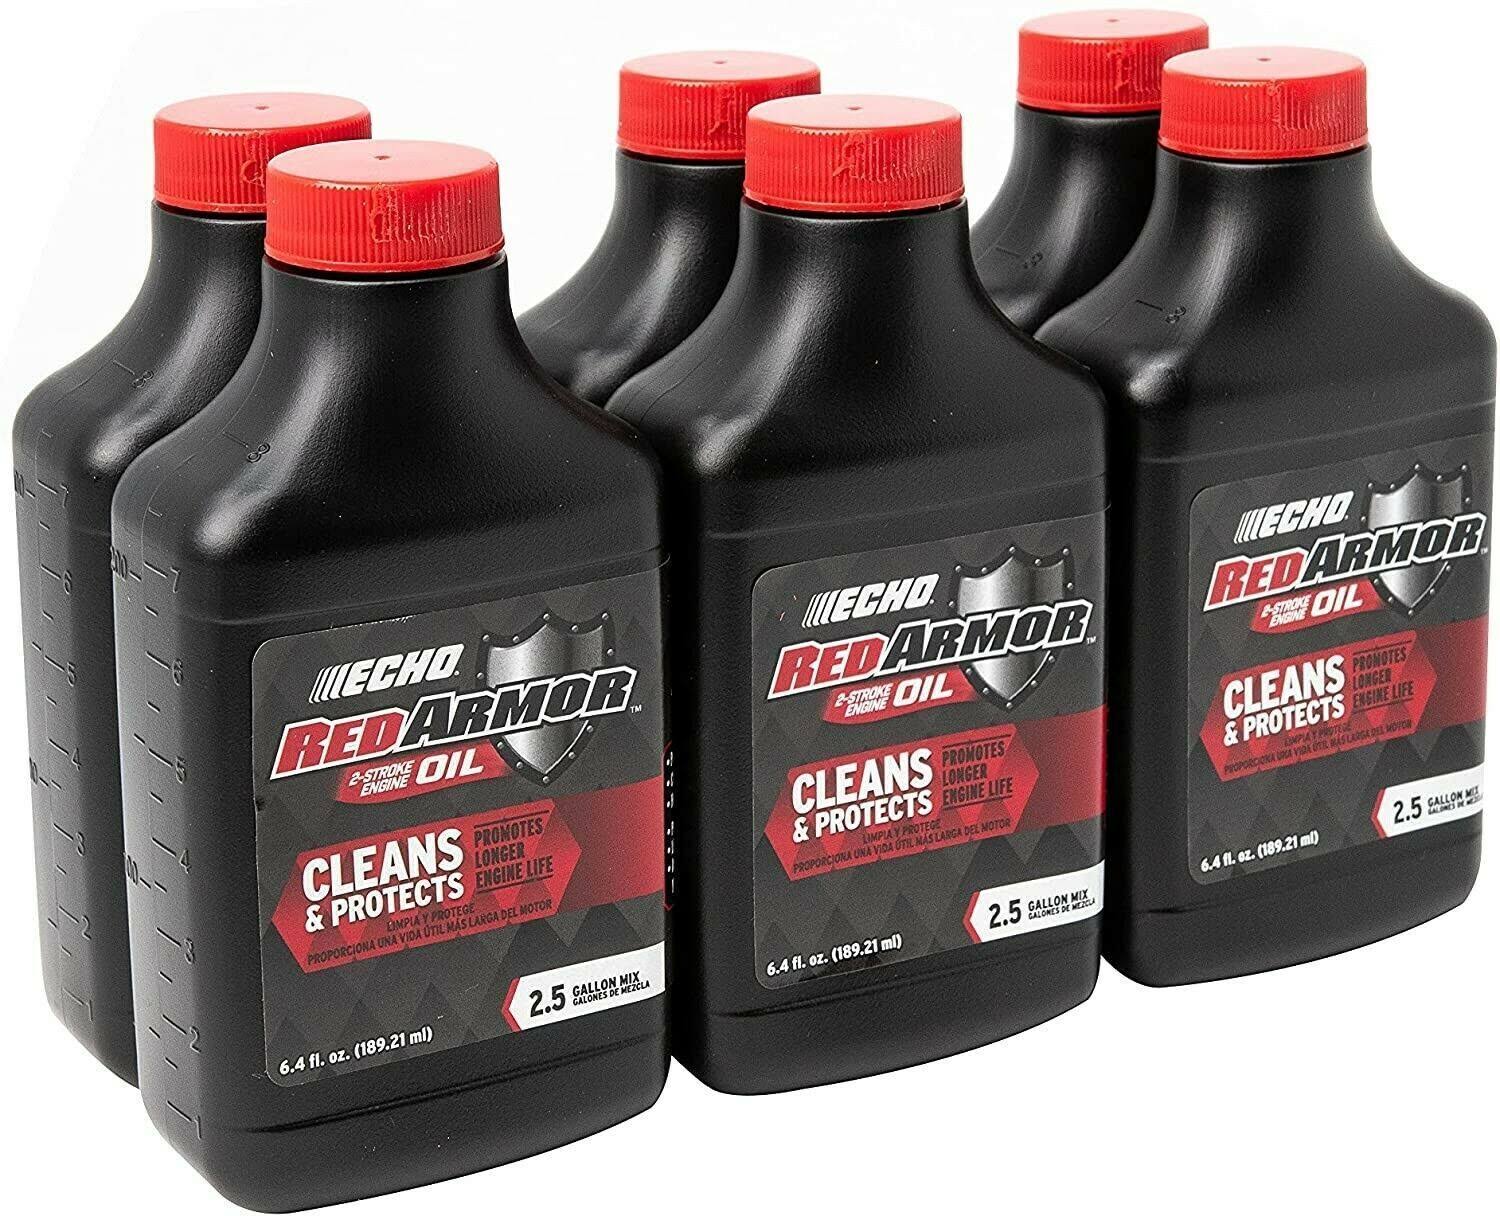 Genuine OEM Echo Red Armor 2 Cycle Oil 2.5 Gallon Mix 50:1 6550025 6.4oz (12pack